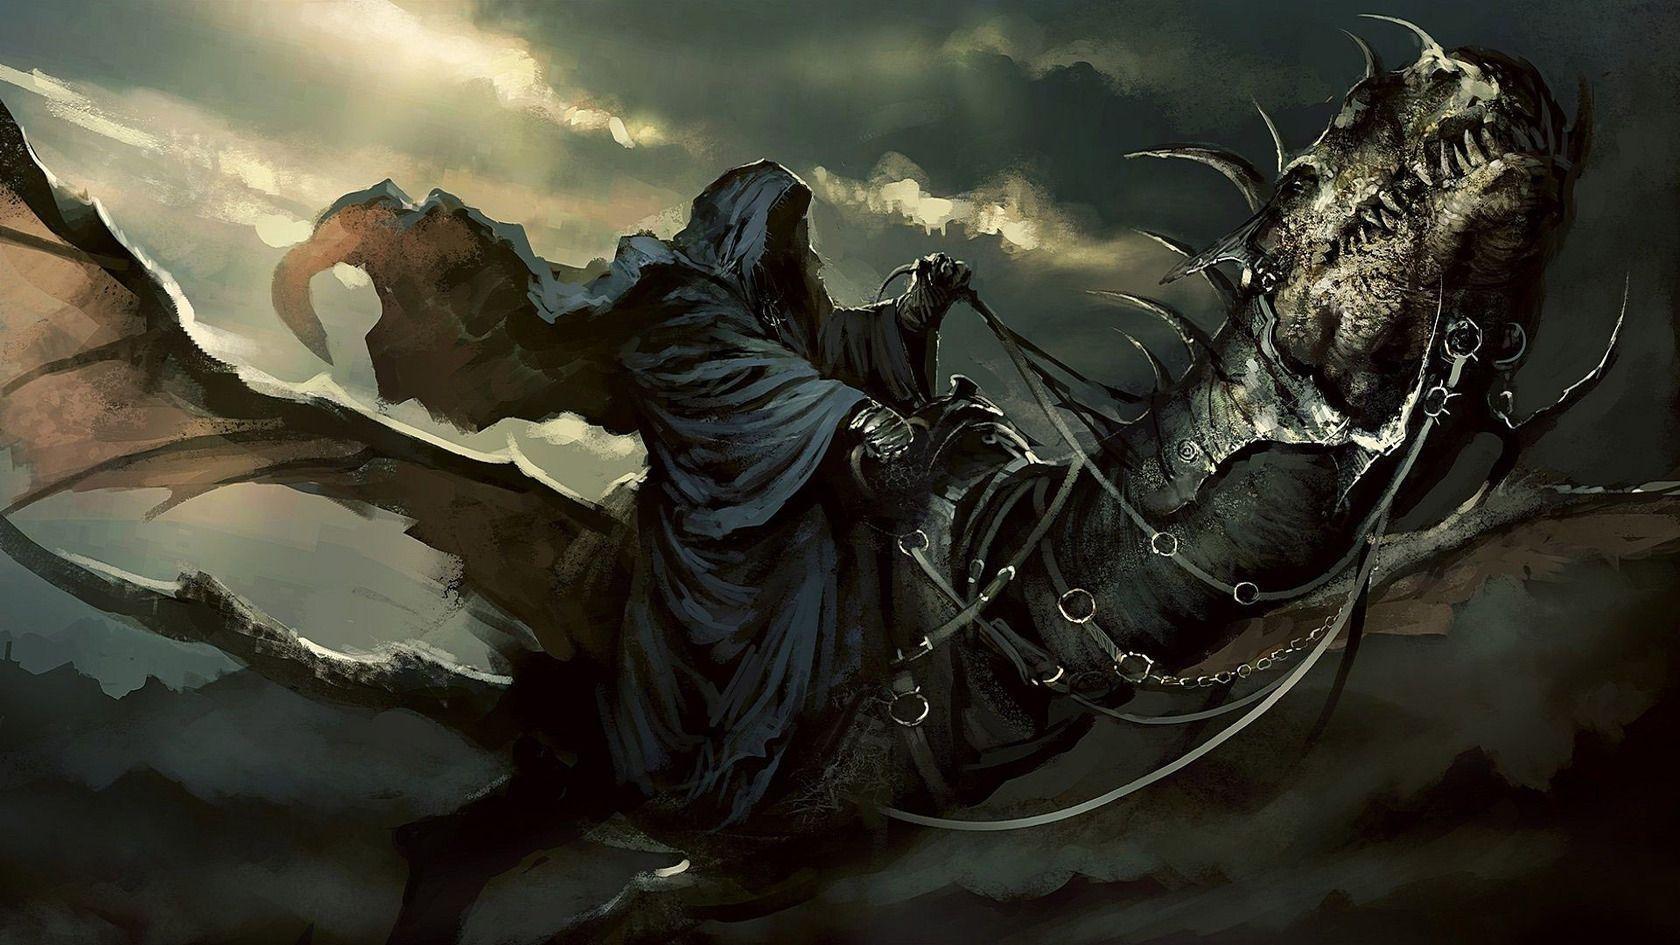 Lord of the Rings Nazgul Movie WallPaper HD